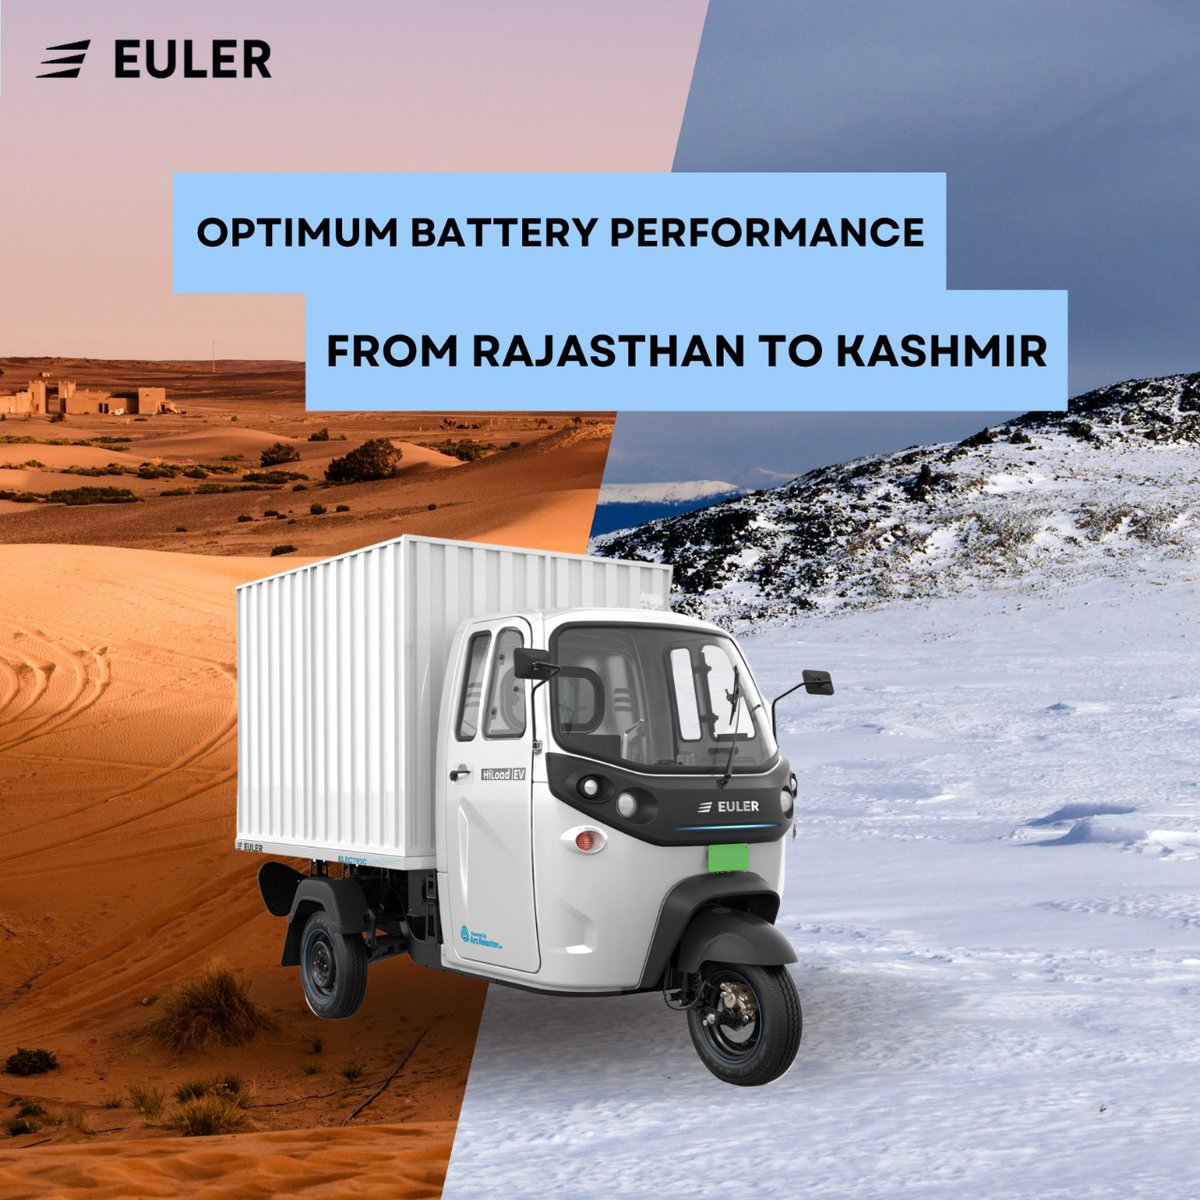 Be it the deserts of Rajasthan or the snow clad mountains of Kashmir, Euler’s ArcReactor Technology ensures you get optimum power wherever you go. #BadaSochoHiLoadSocho https://t.co/TYyNPM9ZOX